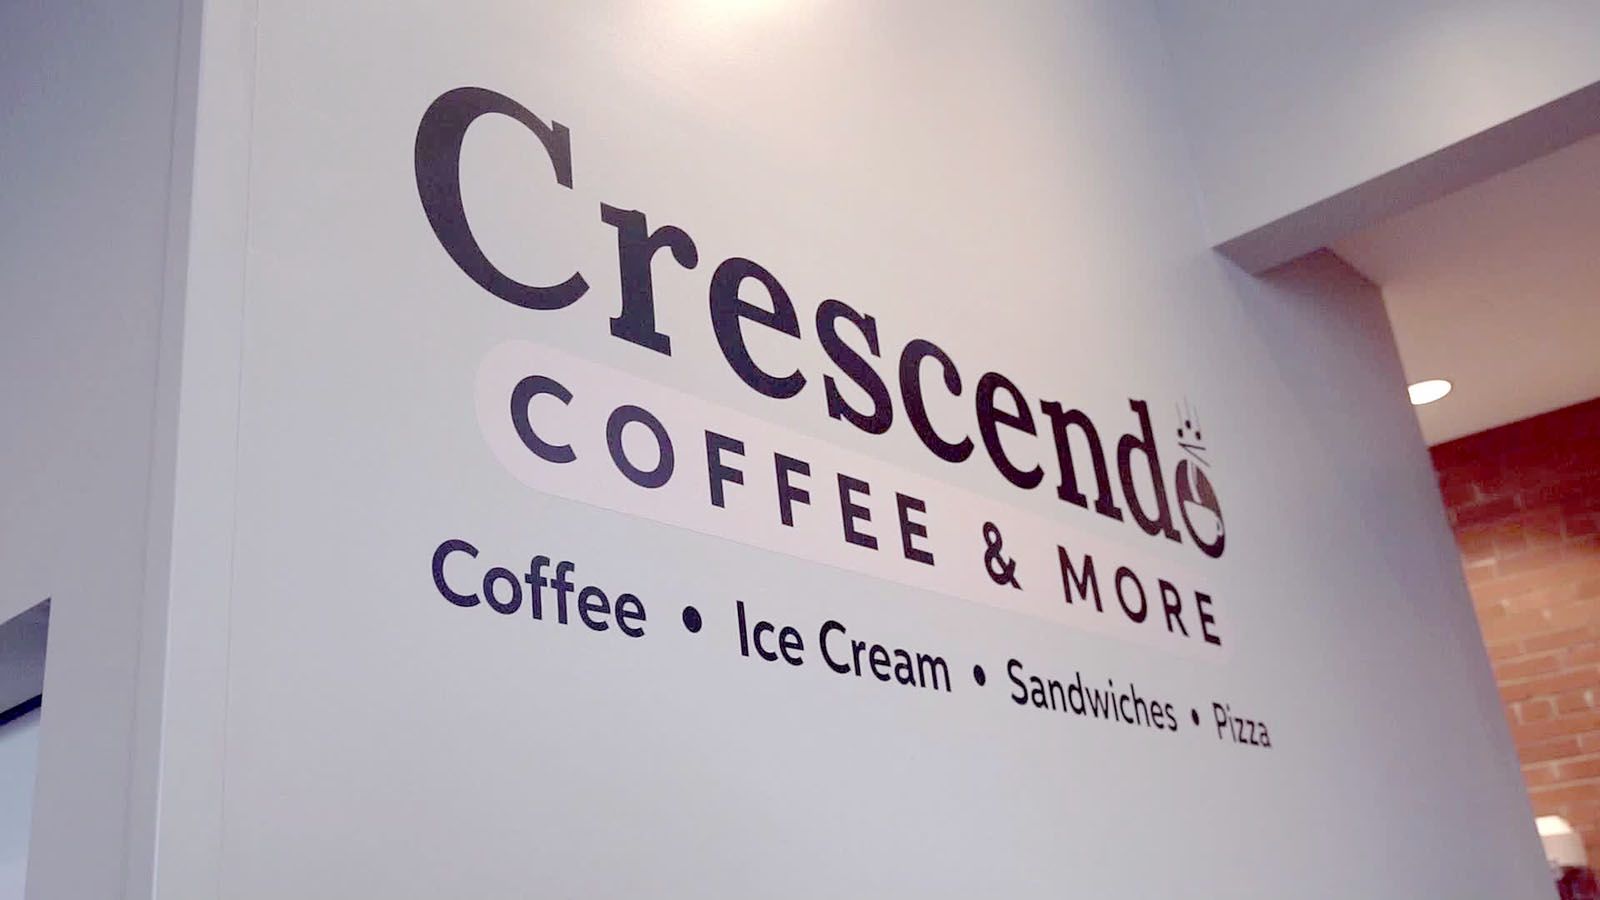 Crescendo Coffee & More will host members of the Fort Wayne Philharmonic on Wednesday, Jan. 17.